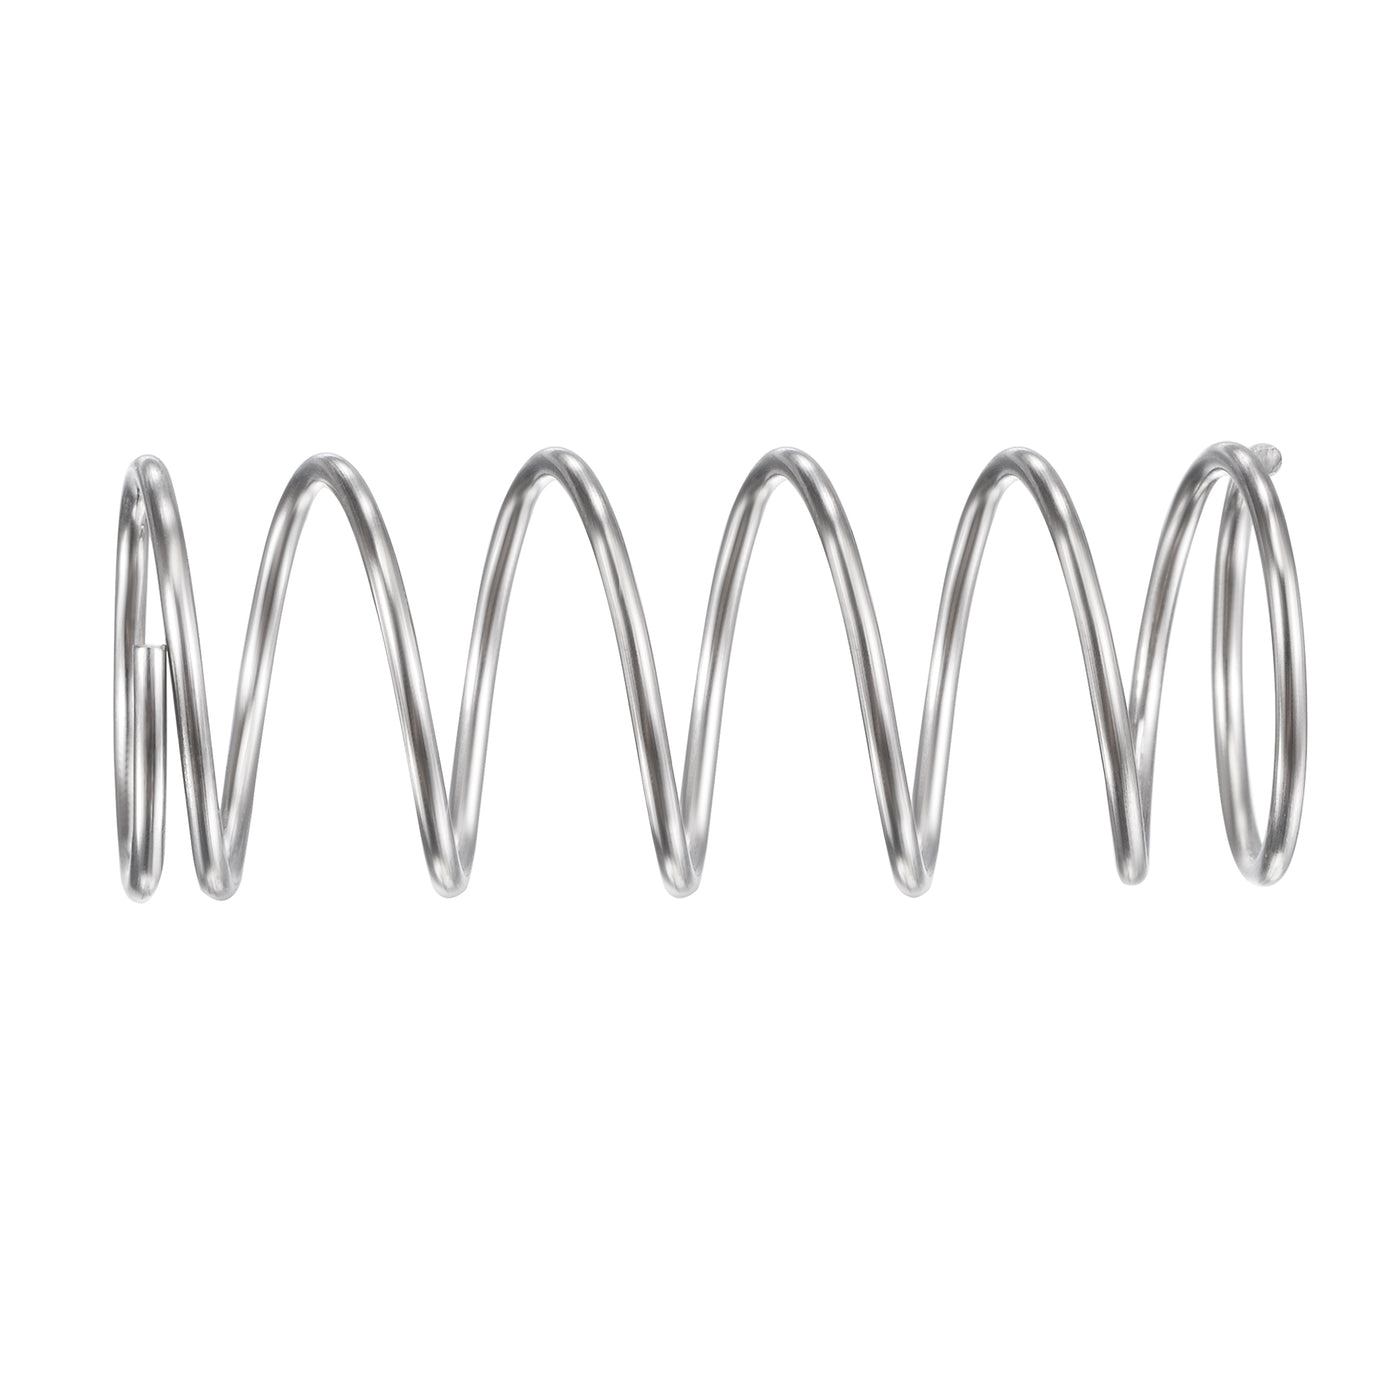 uxcell Uxcell 16mmx1.2mmx40mm 304 Stainless Steel Compression Spring 15.7N Load Capacity 10pcs